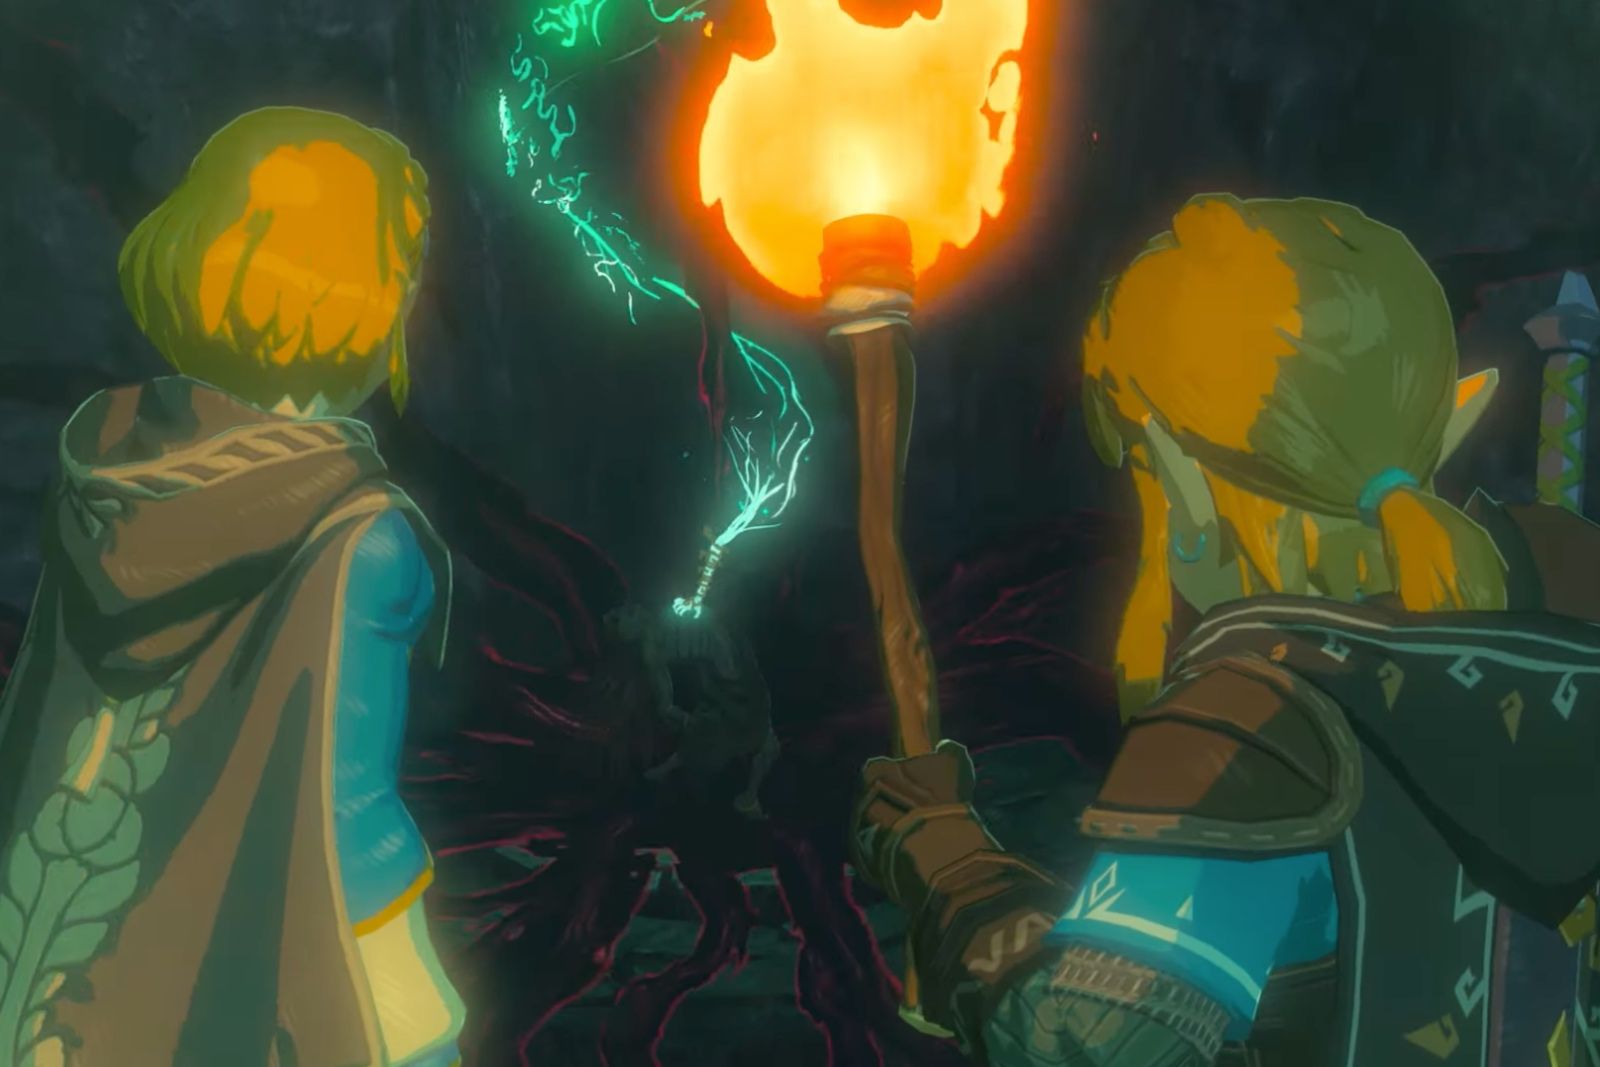 Everything you need to know about The Legend of Zelda: Breath of the Wild 2 - trailer, release date and more photo 2